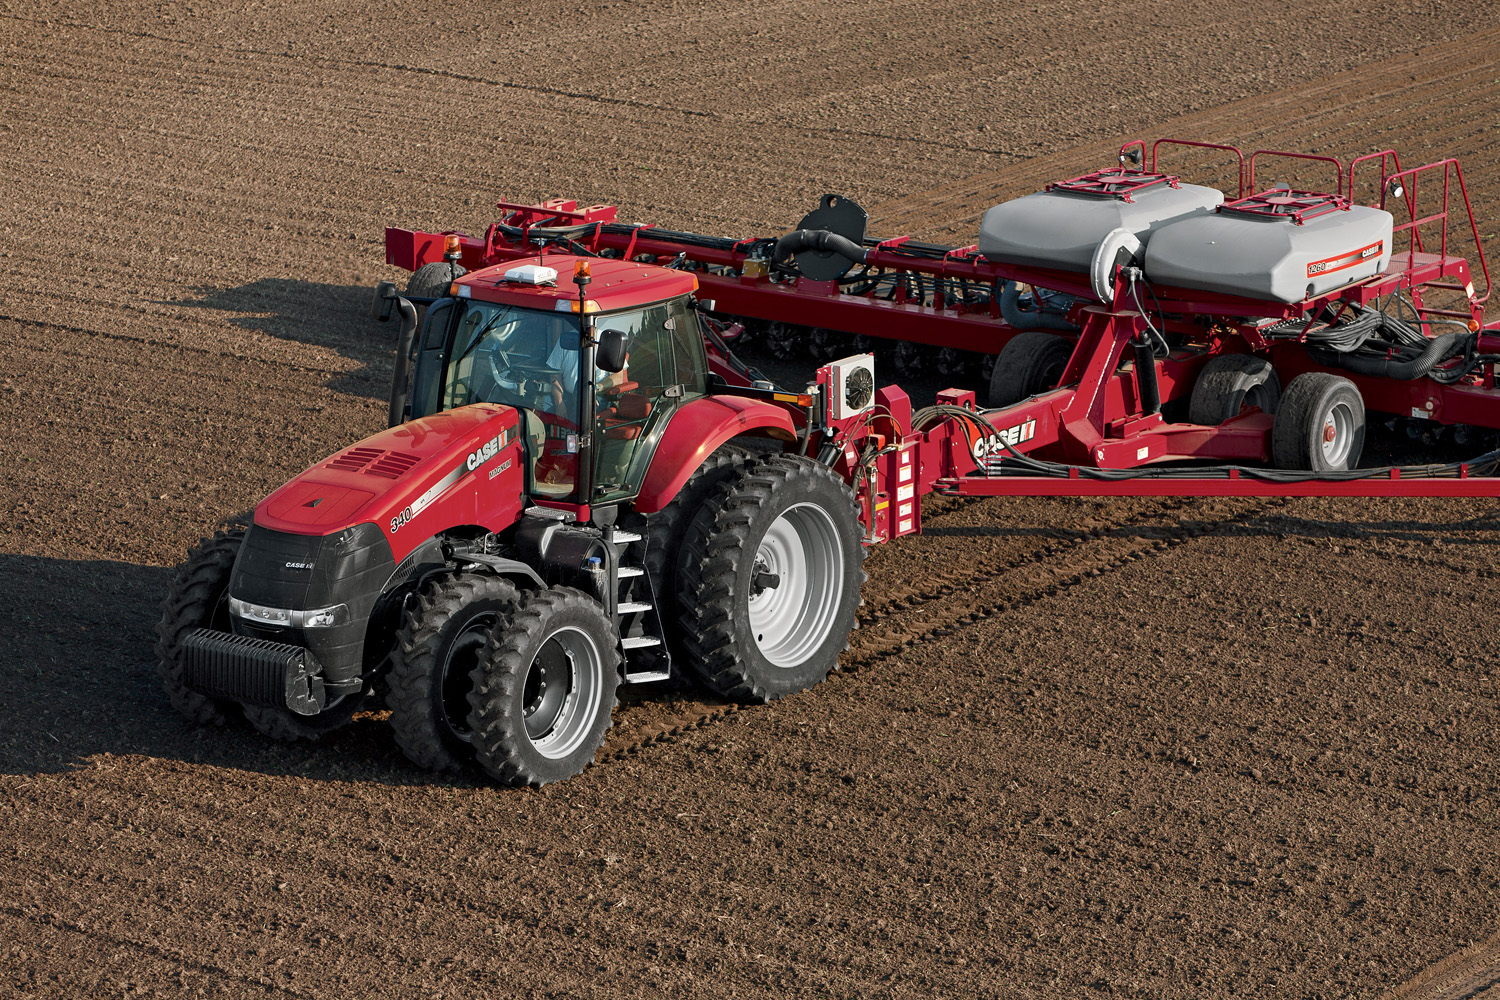 2012-3-1_Case_IH_Leads_the_Industry_With_Efficient_Power_Using_SCR_Technology_Magnum_Medium_Res.jpg (958 KB)